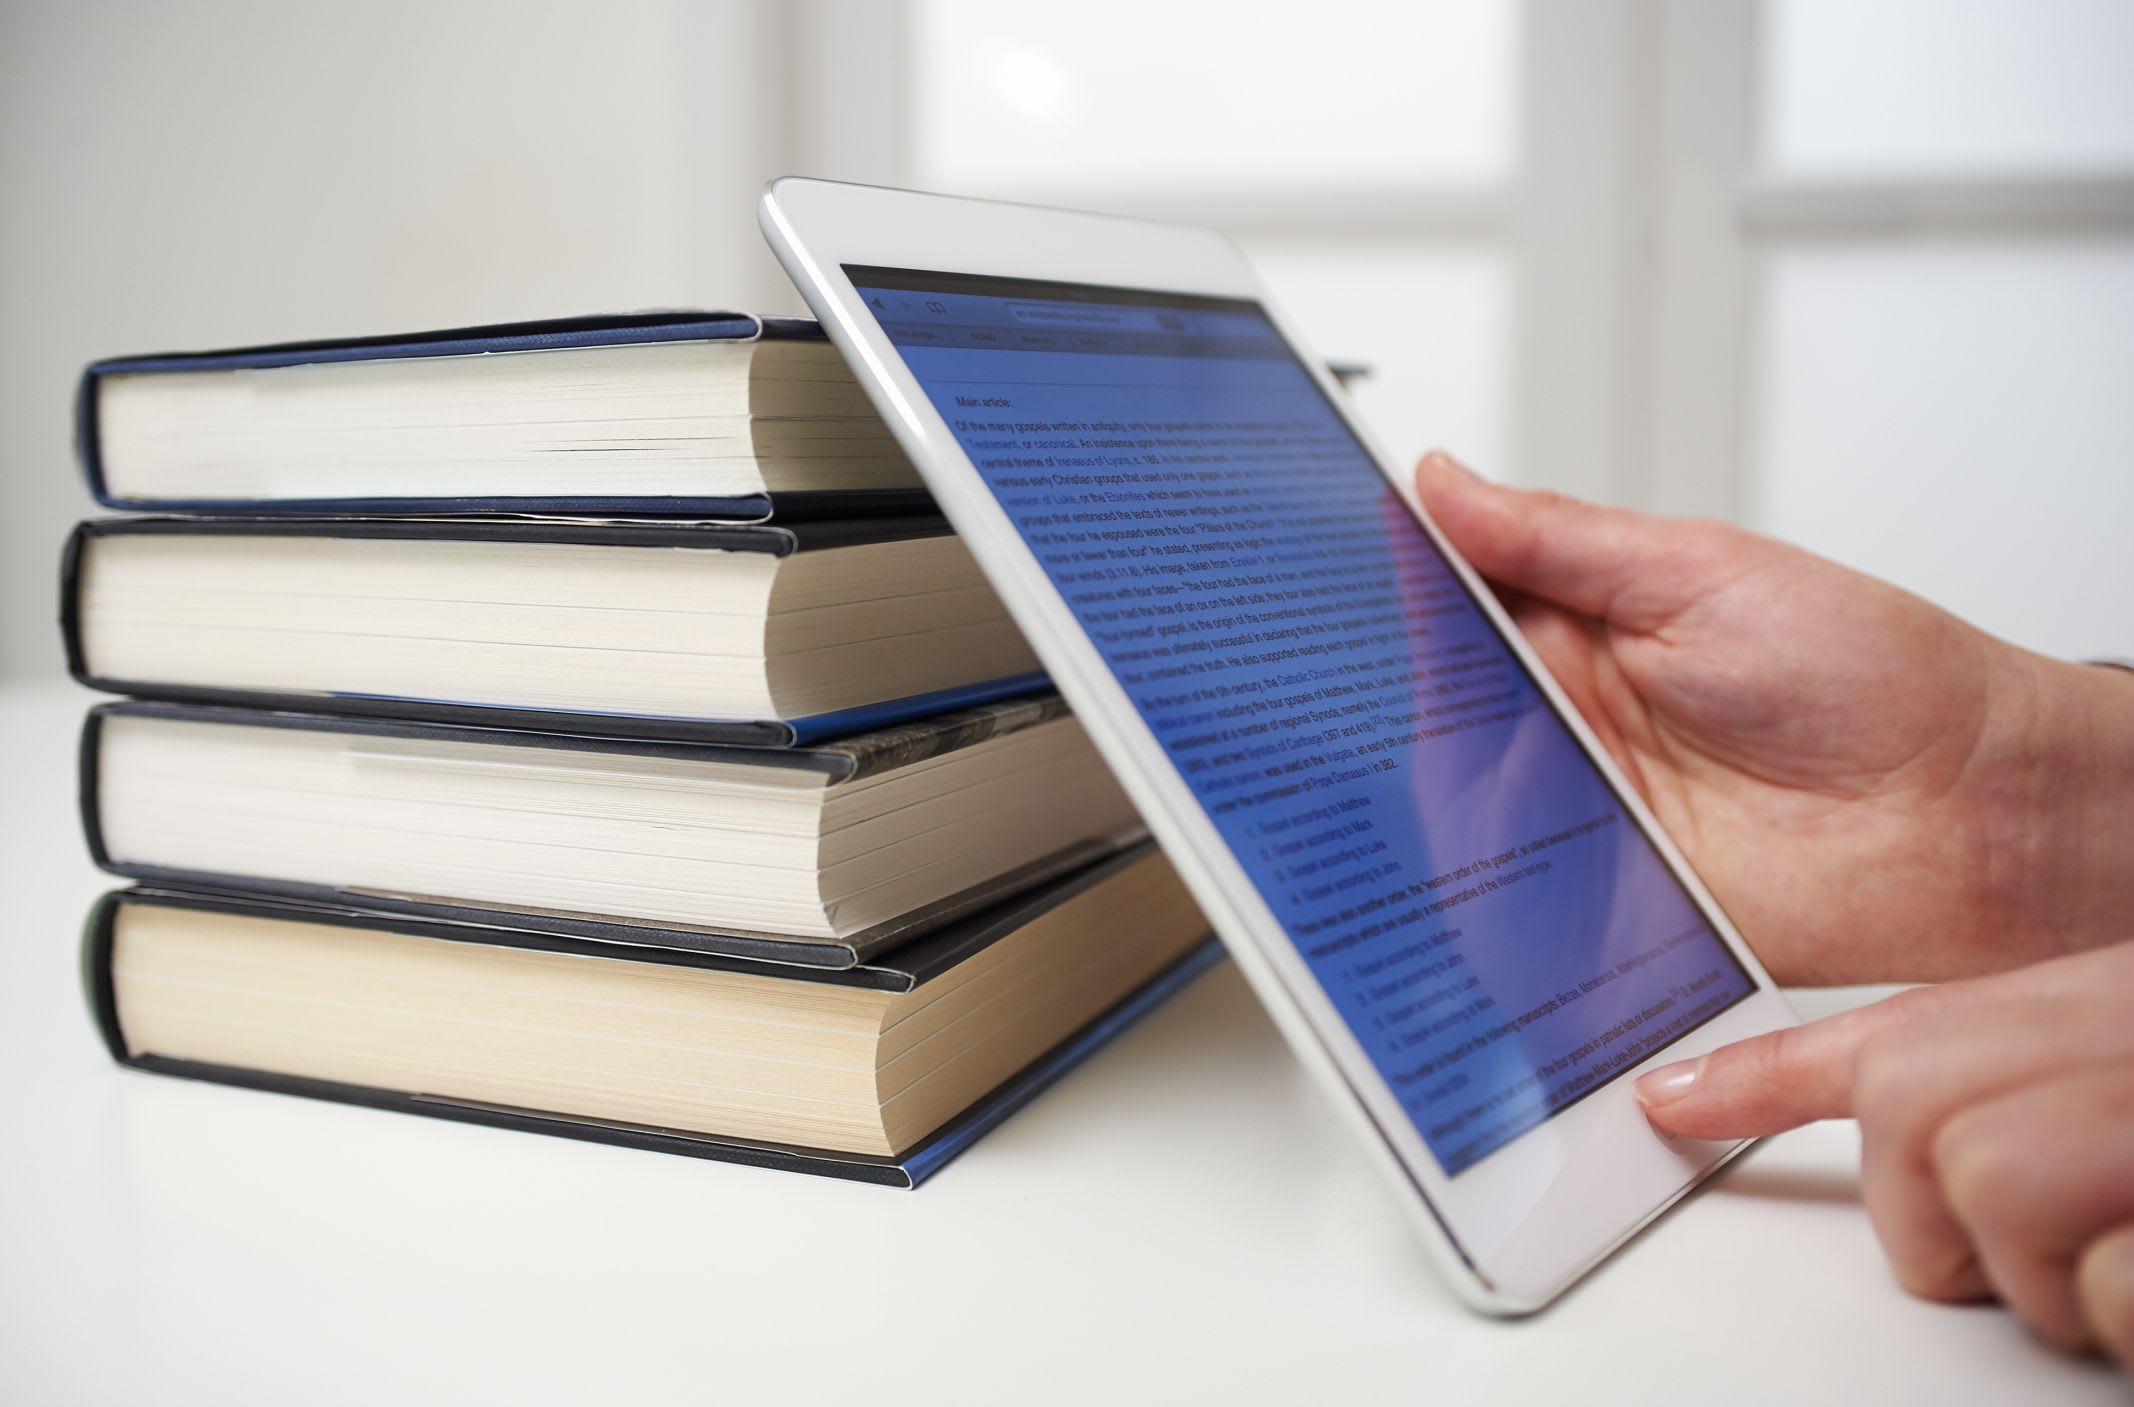 EBOOK : A BOOK IN AN ELECTRONIC FORMAT